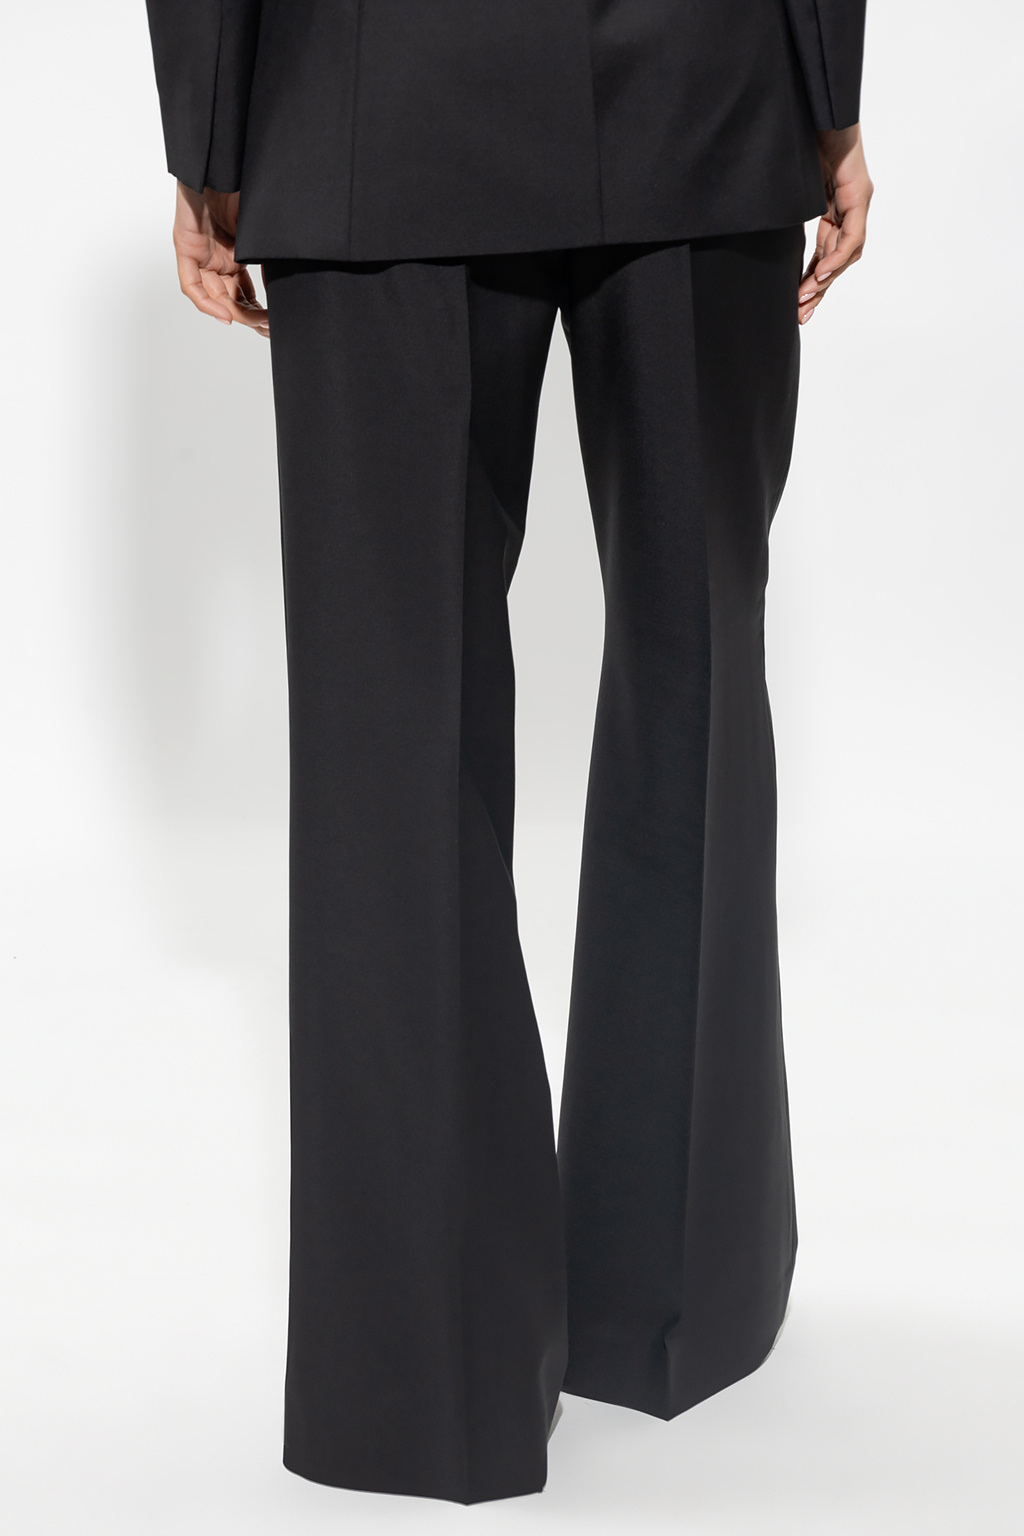 Givenchy Flared vibrant trousers